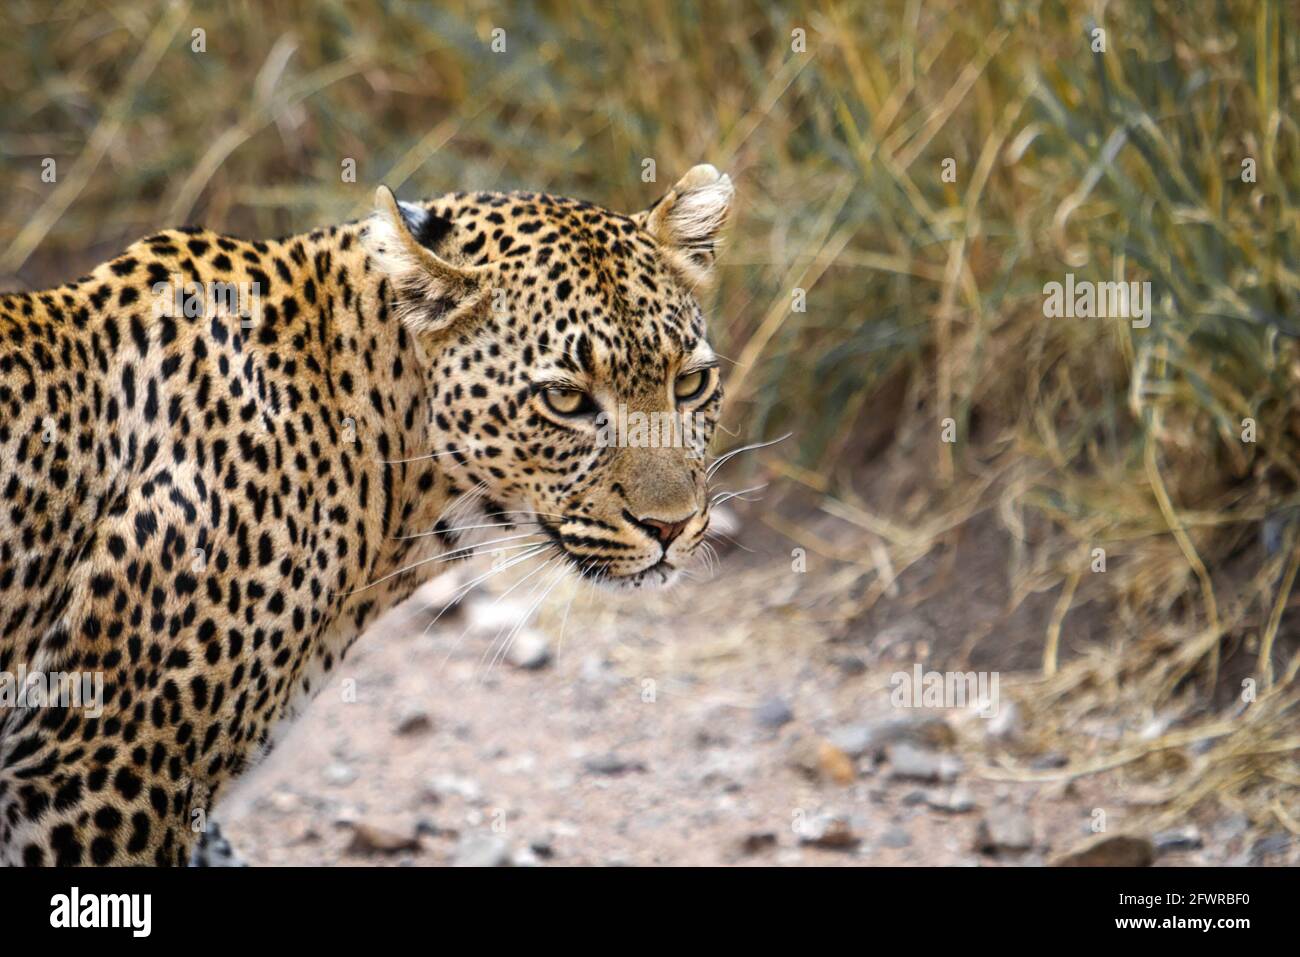 A single leopard facing right close up on safari in Africa. Stock Photo